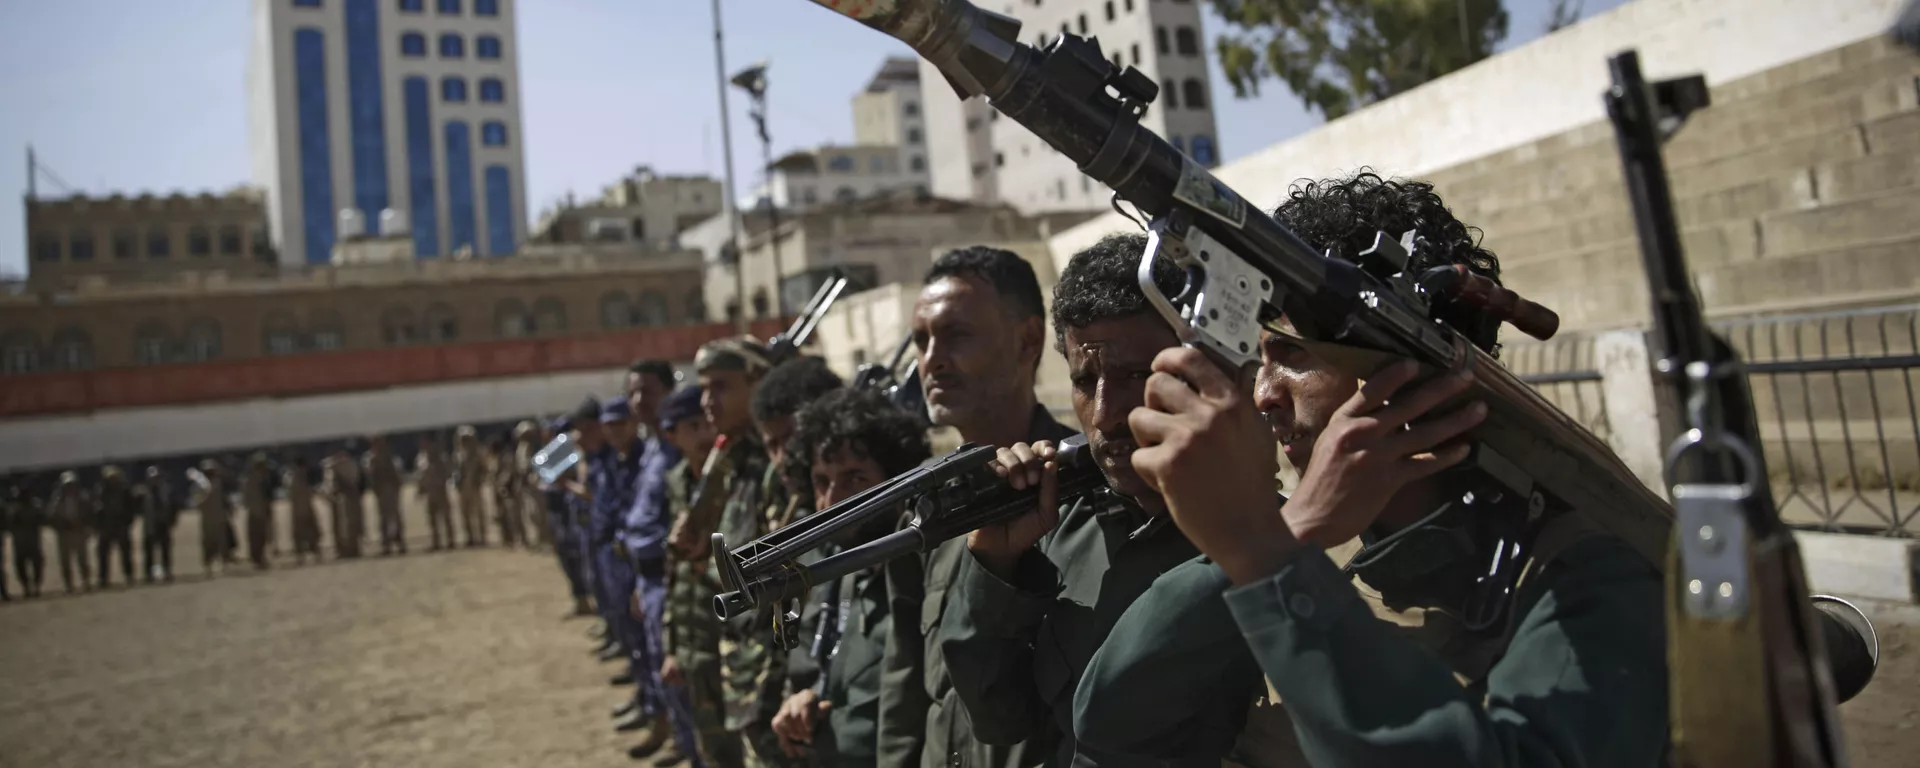 Houthi rebel fighters display their weapons during a gathering aimed at mobilizing more fighters for the Iranian-backed Houthi movement, in Sanaa, Yemen, Thursday, Feb. 20, 2020. The Houthi rebels control the capital, Sanaa, and much of the country’s north, where most of the population lives. They are at war with a U.S.-backed, Saudi-led coalition fighting on behalf of the internationally recognized government. - Sputnik International, 1920, 22.12.2023